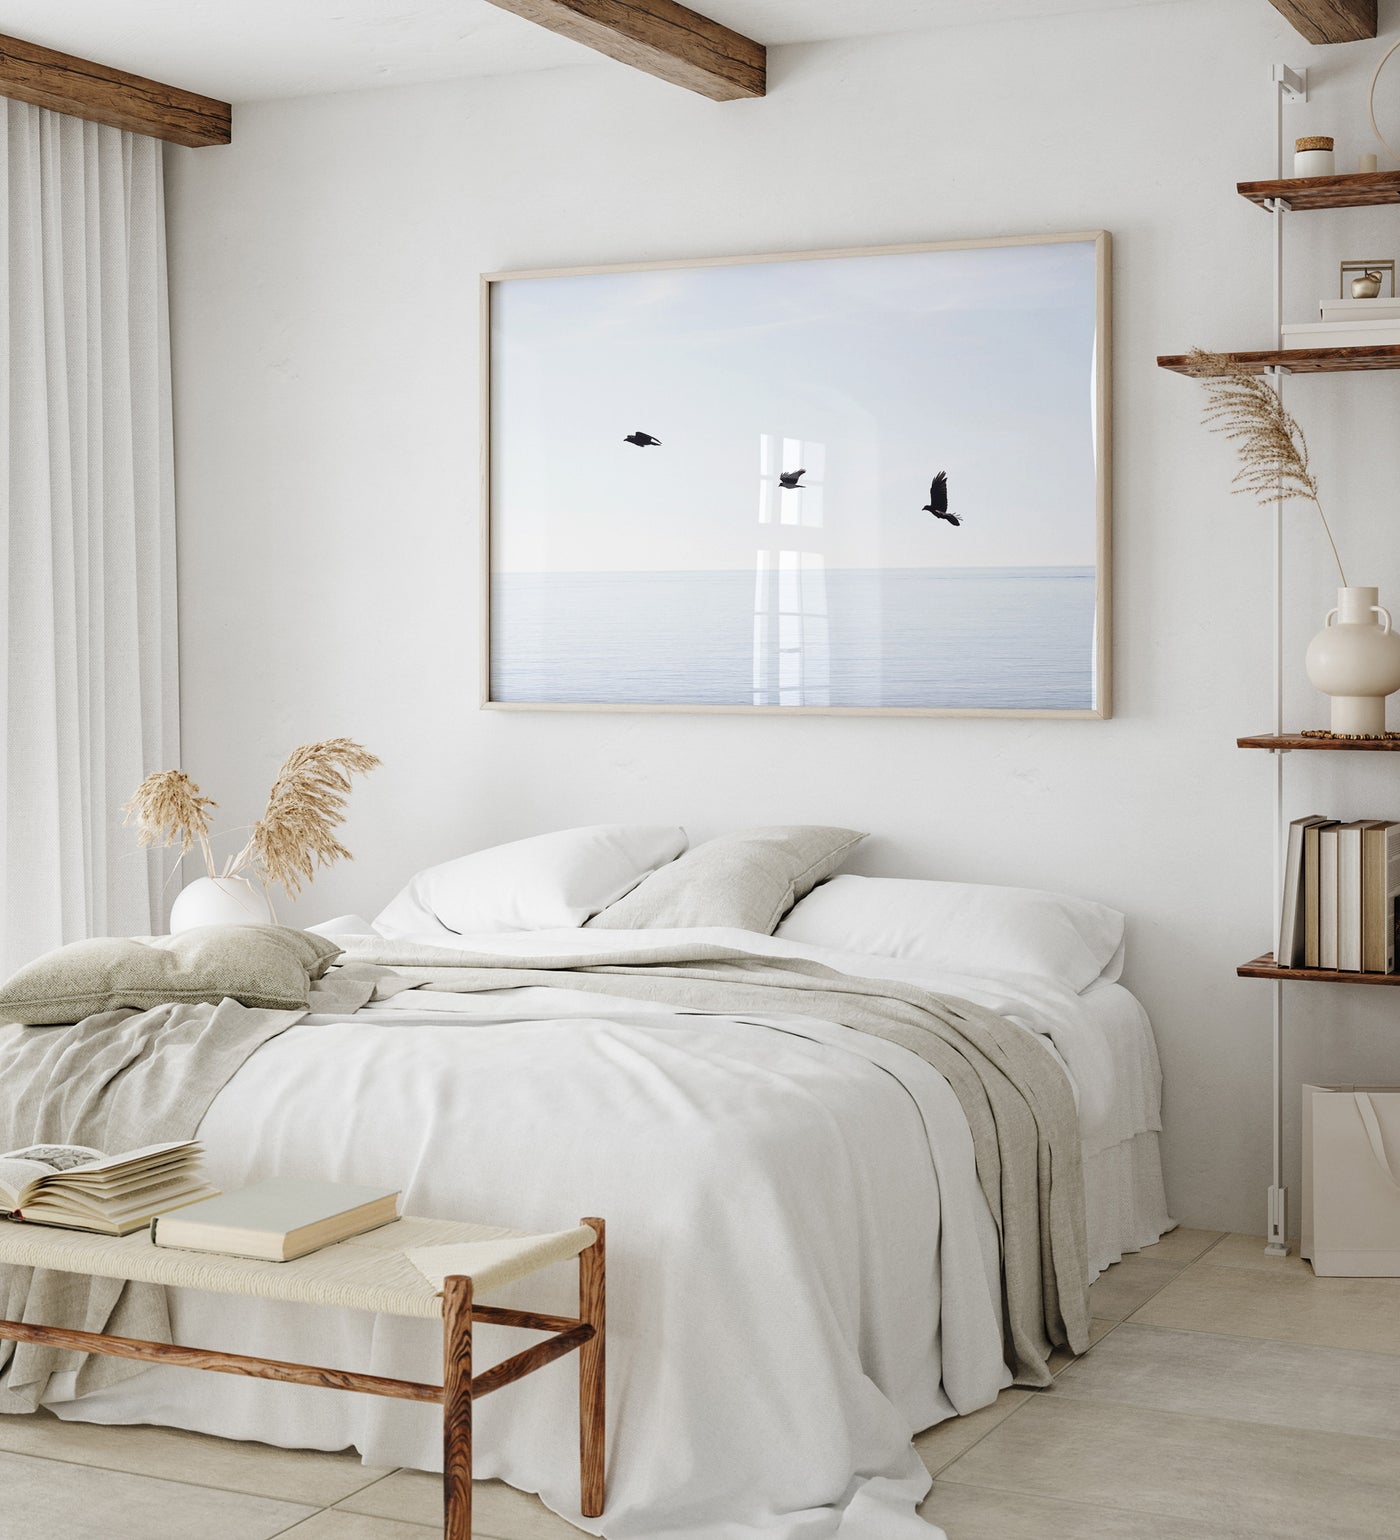 Three Birds - Large fine art print by Cattie Coyle Photography in bedroom